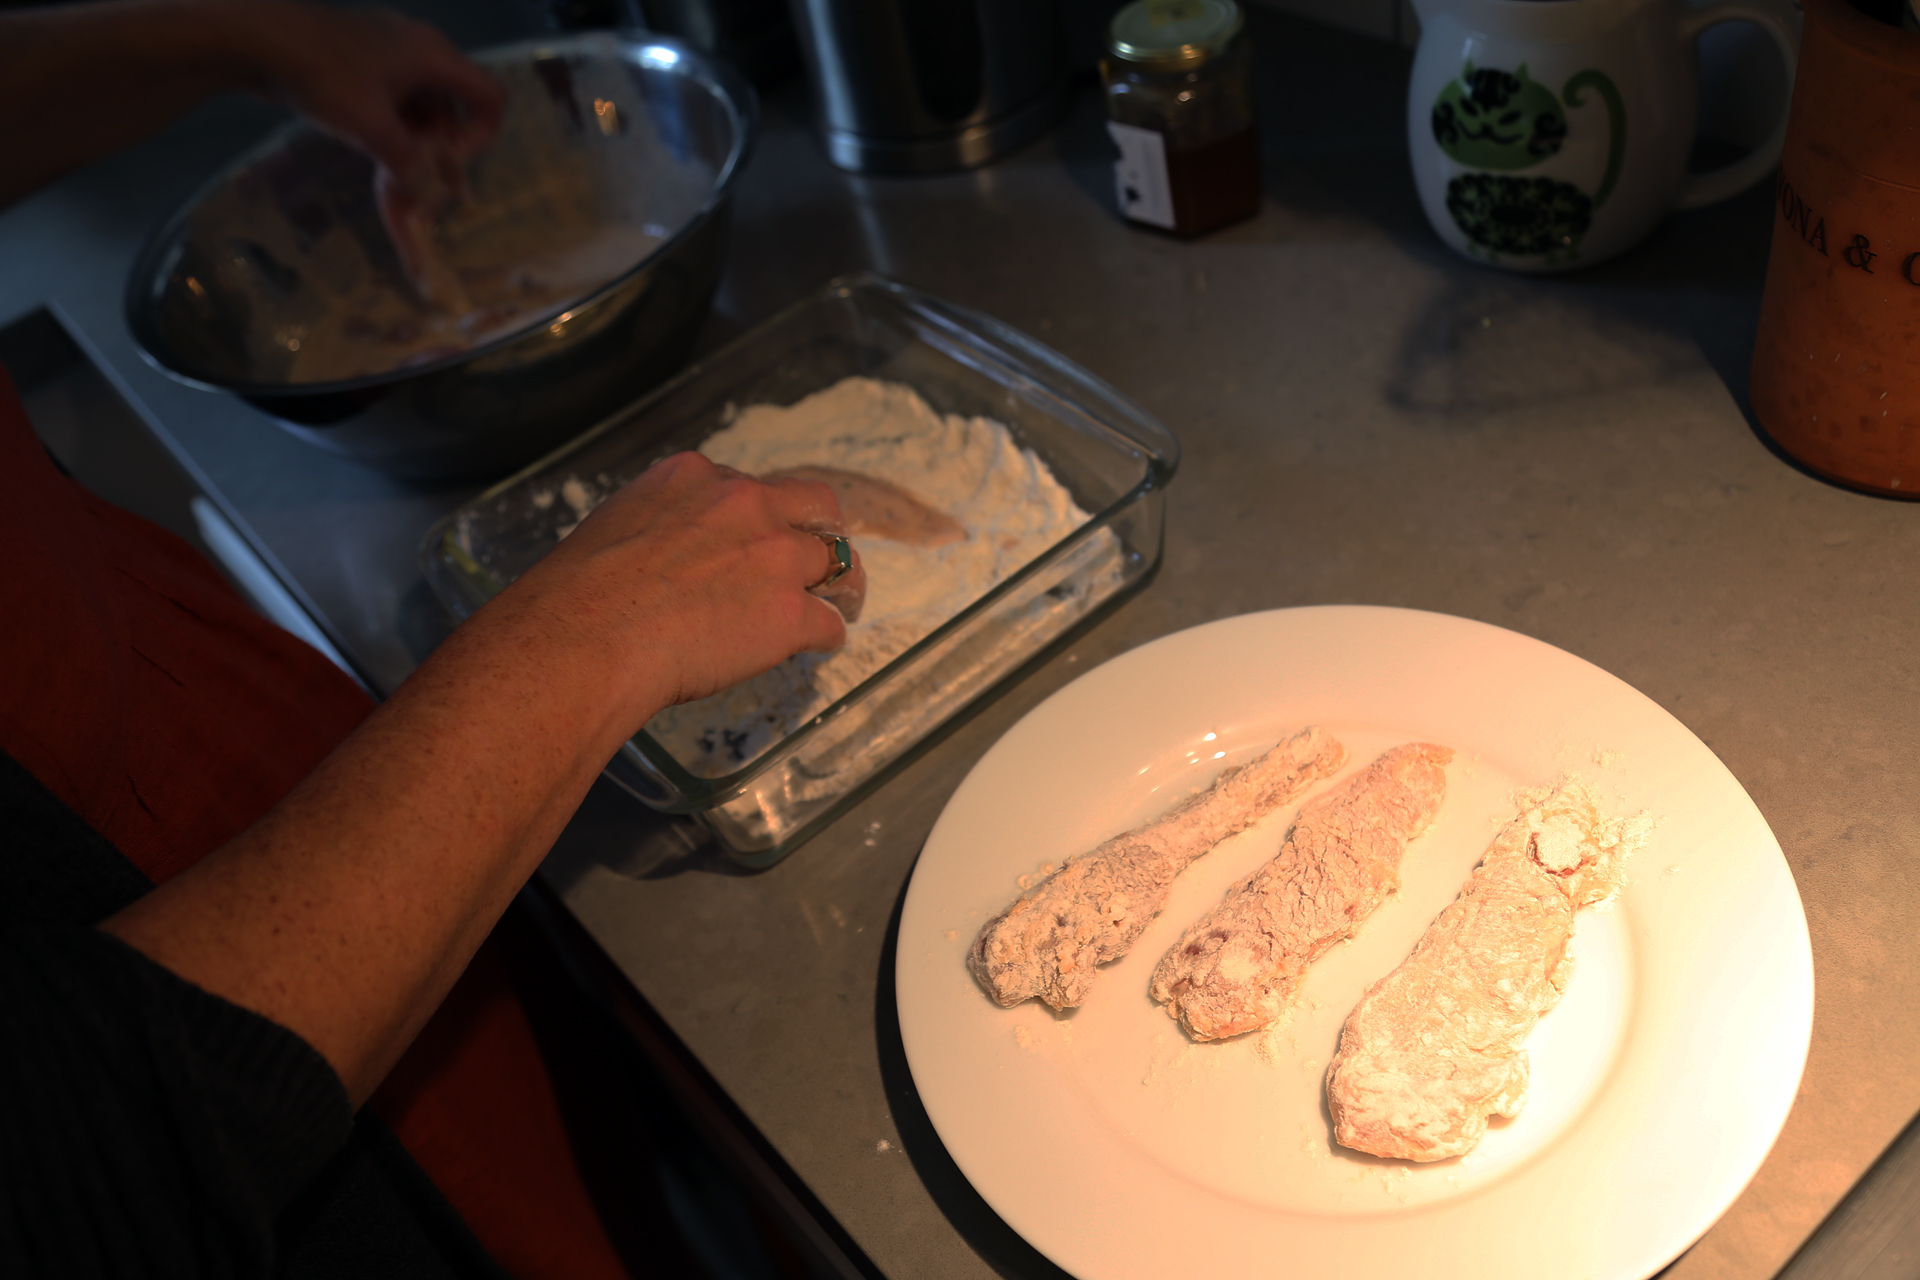 Pick up a chicken strip and let the buttermilk mixture drip off (but leave some of it coating the chicken). Dredge each strip in the flour mixture, coating it evenly, then set it aside on a plate.